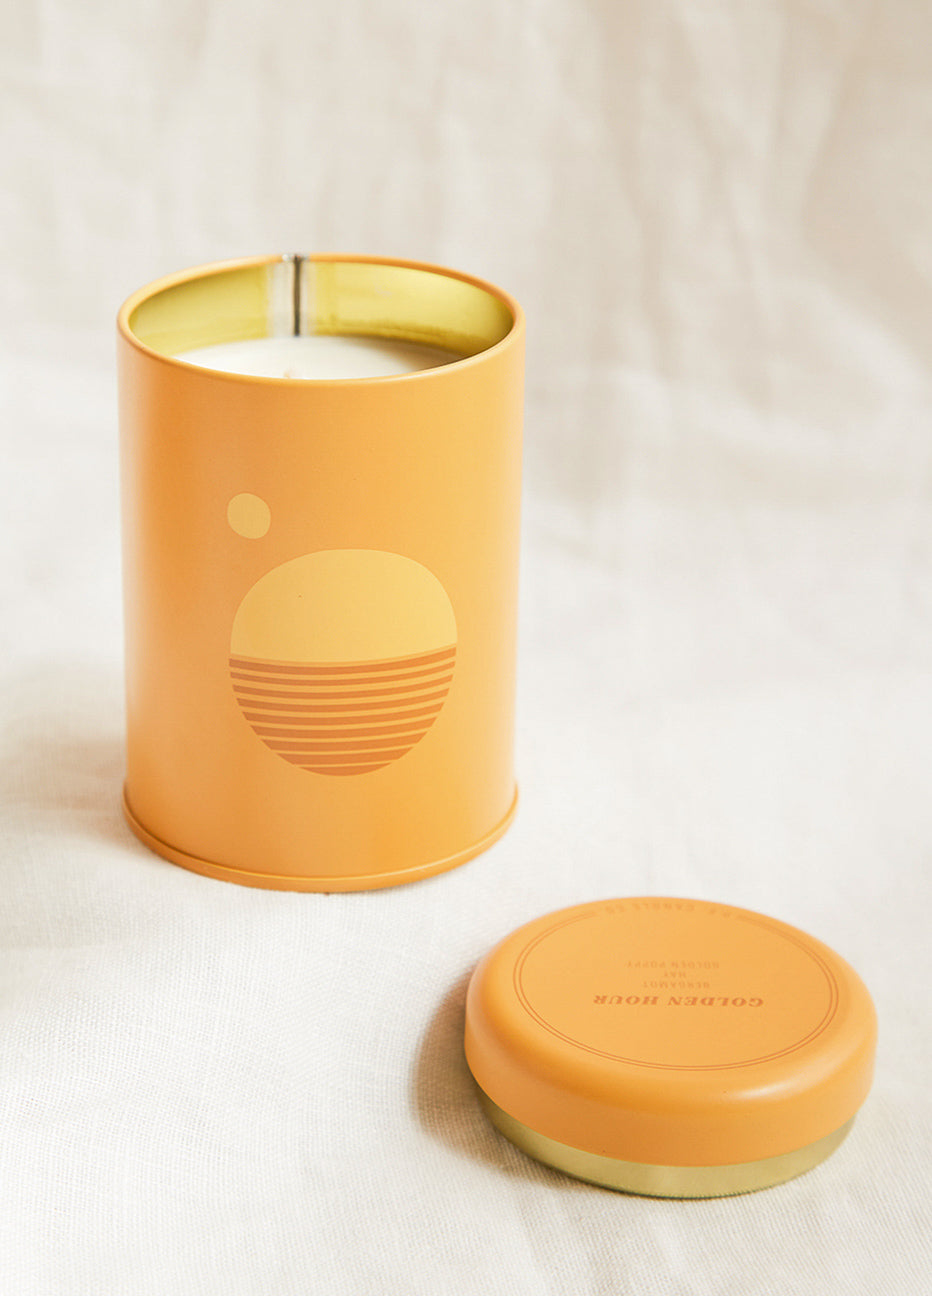 P.F. Candle Co. Golden Hour